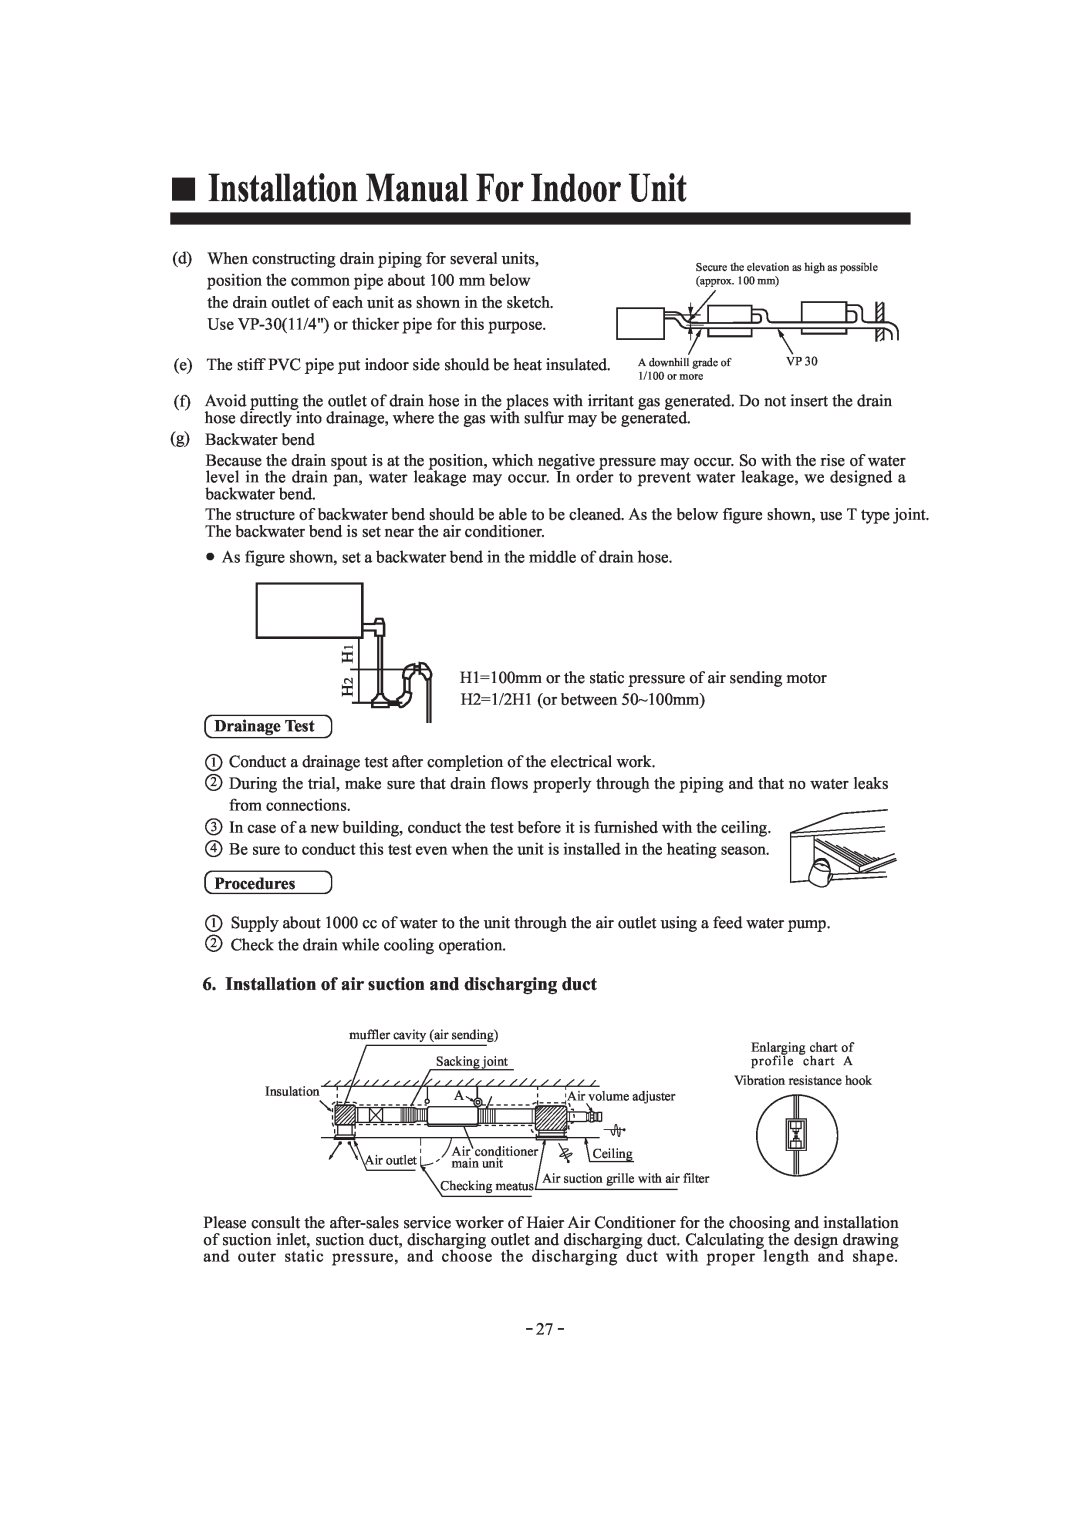 Haier HDU-42HF03/H installation manual Installation Manual For Indoor Unit, Drainage Test, Procedures 